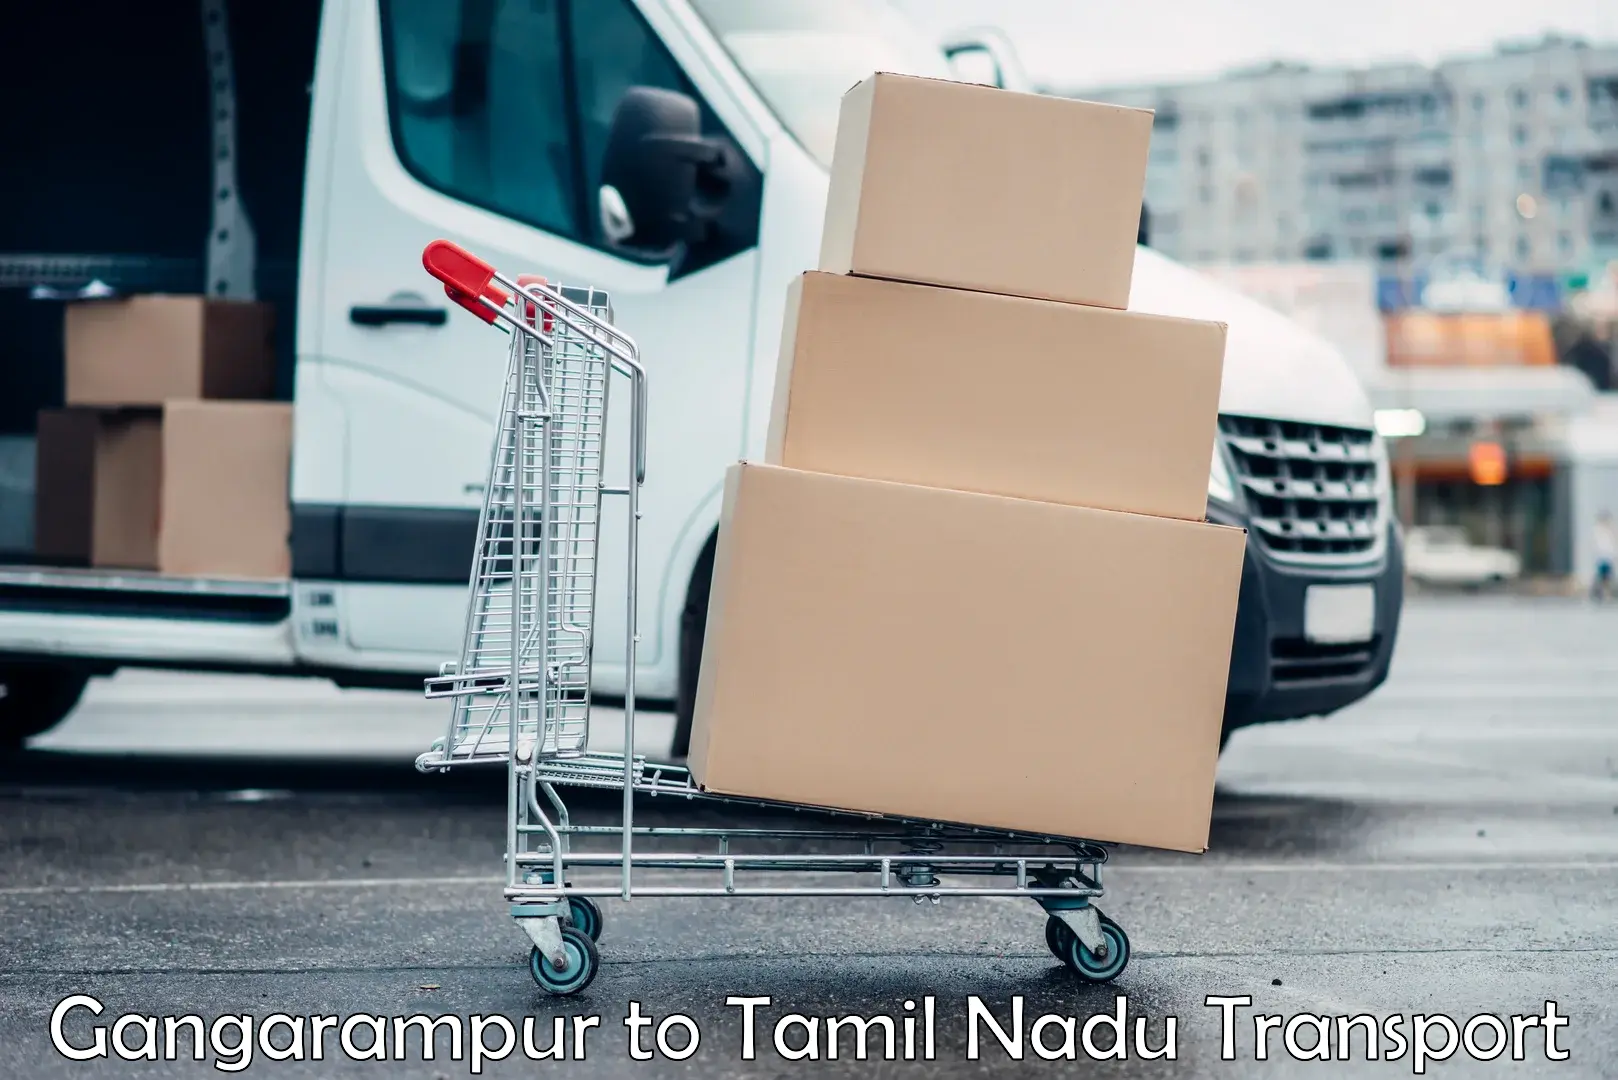 Parcel transport services Gangarampur to Shanmugha Arts Science Technology and Research Academy Thanjavur